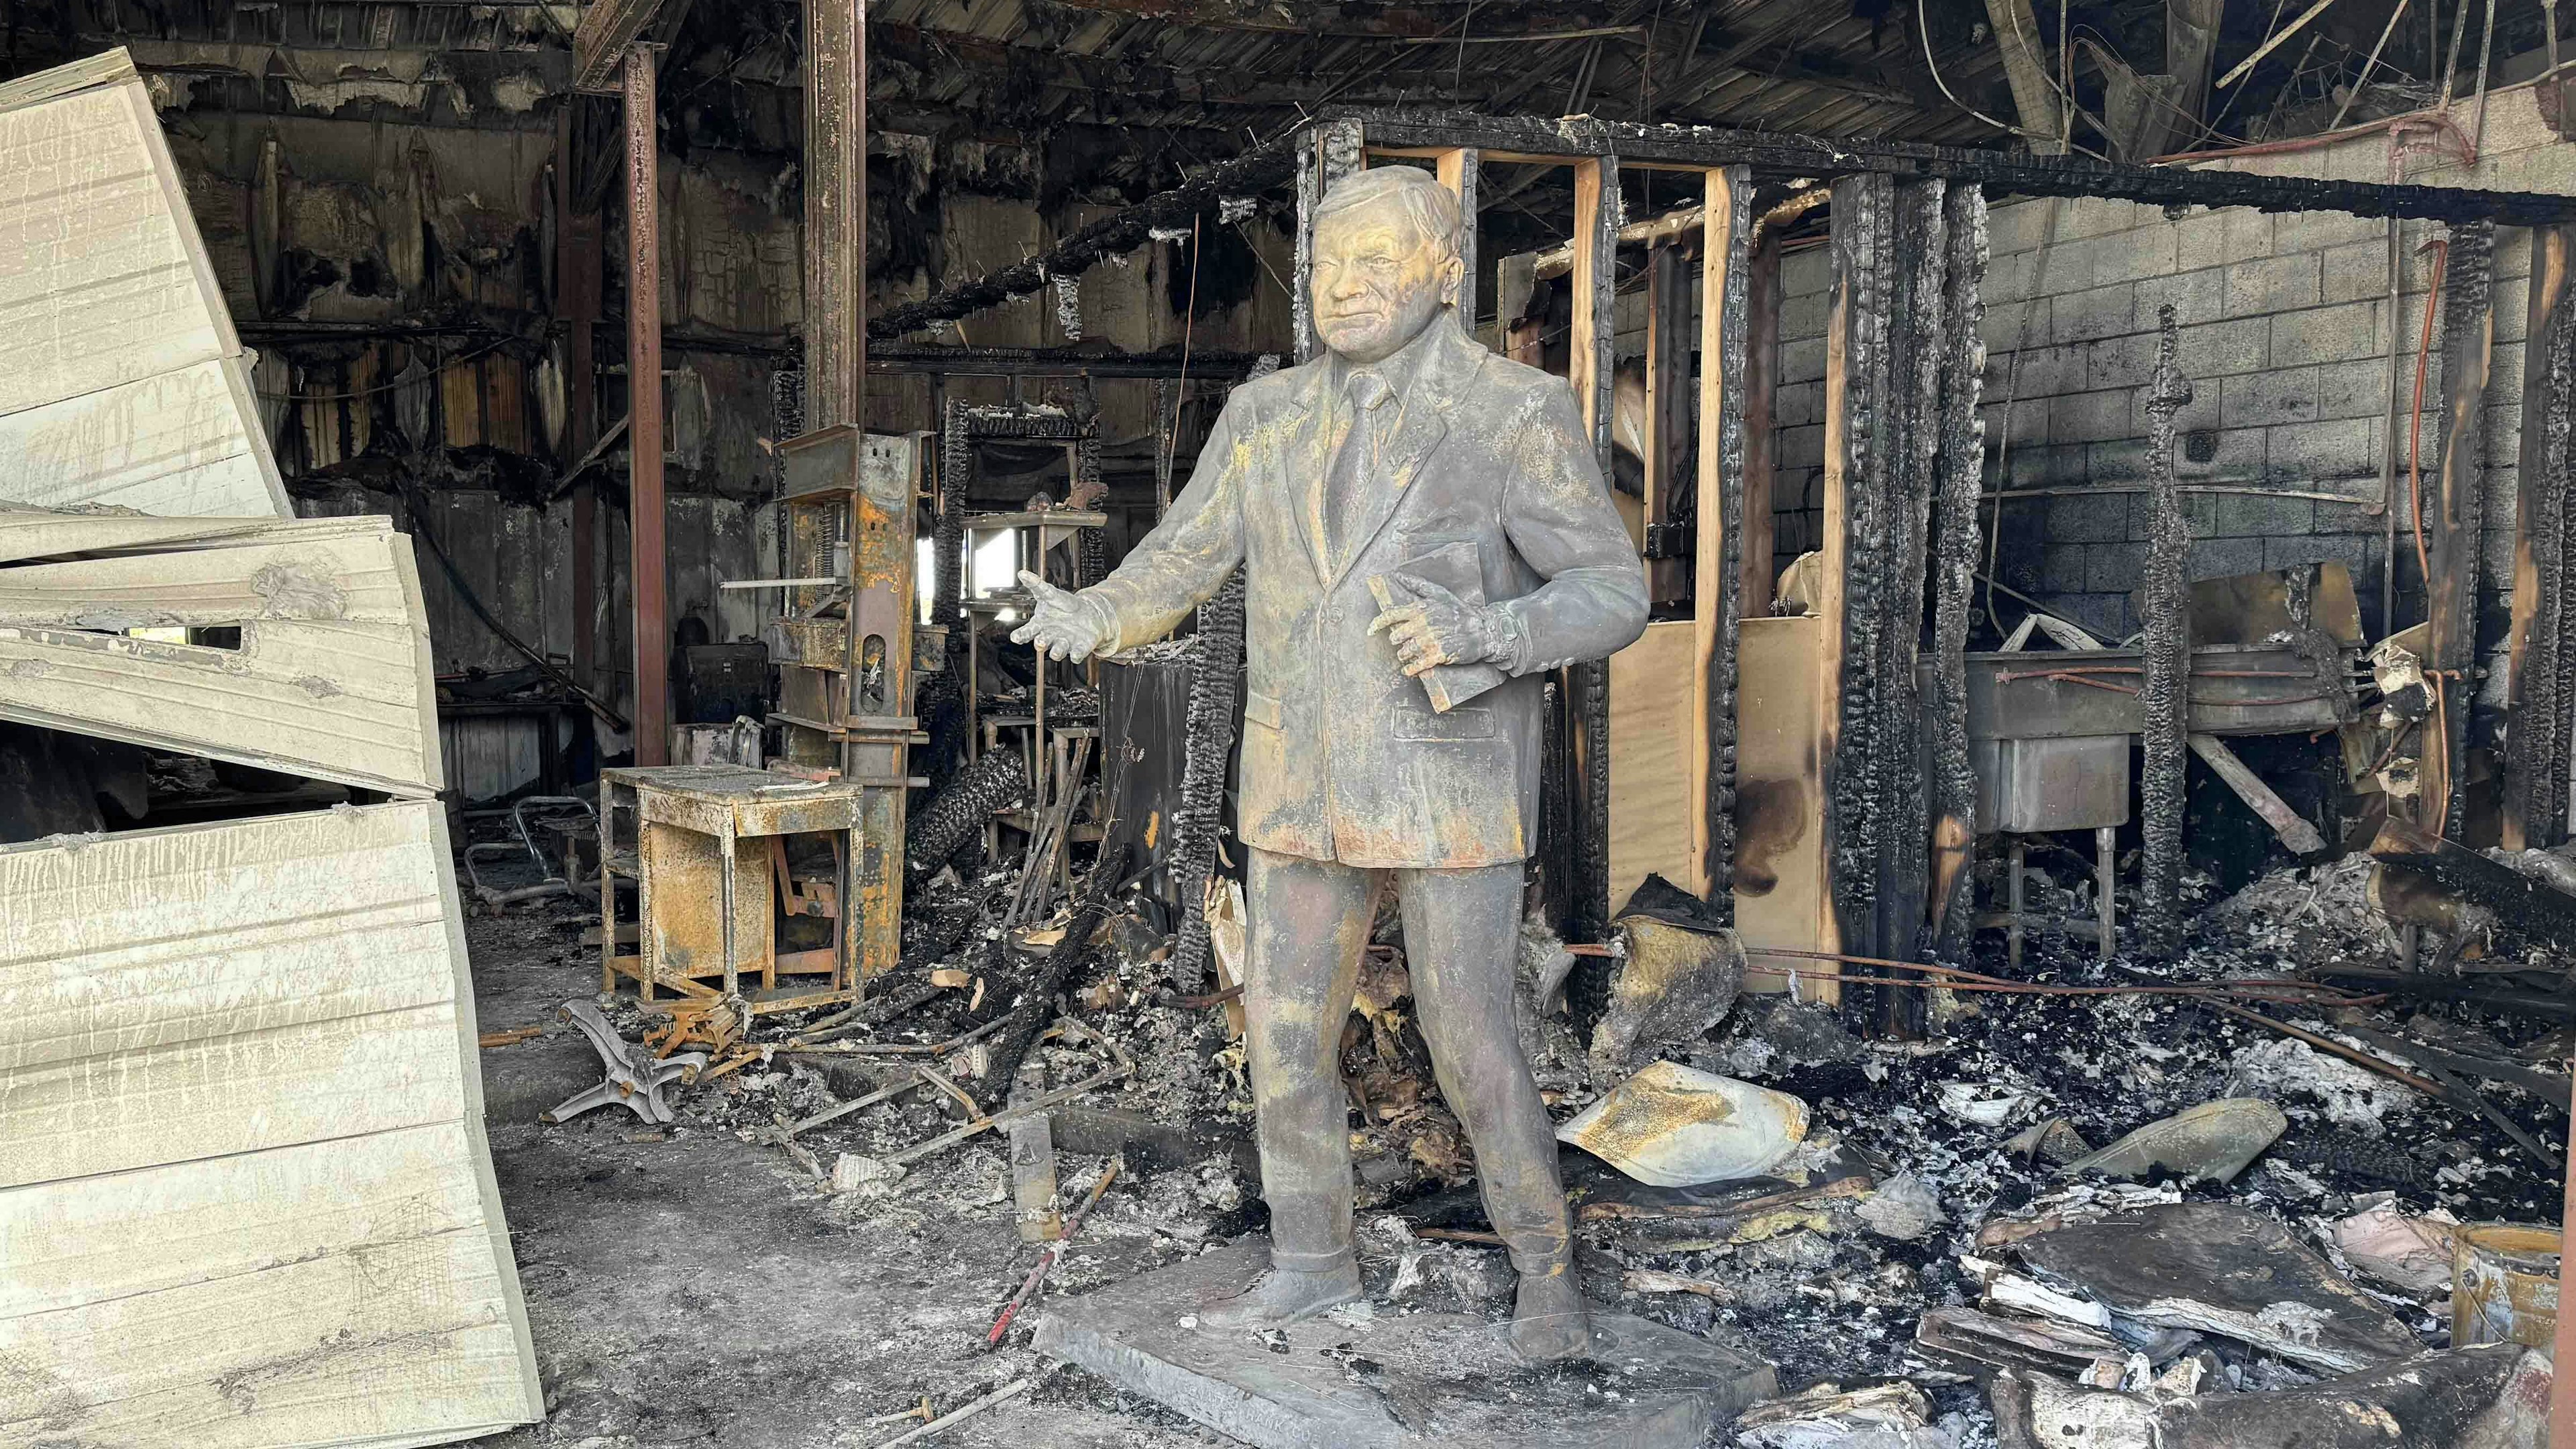 Millions Lost In Overnight Fire At Cody Bronze Art Foundry, 100% Loss ...